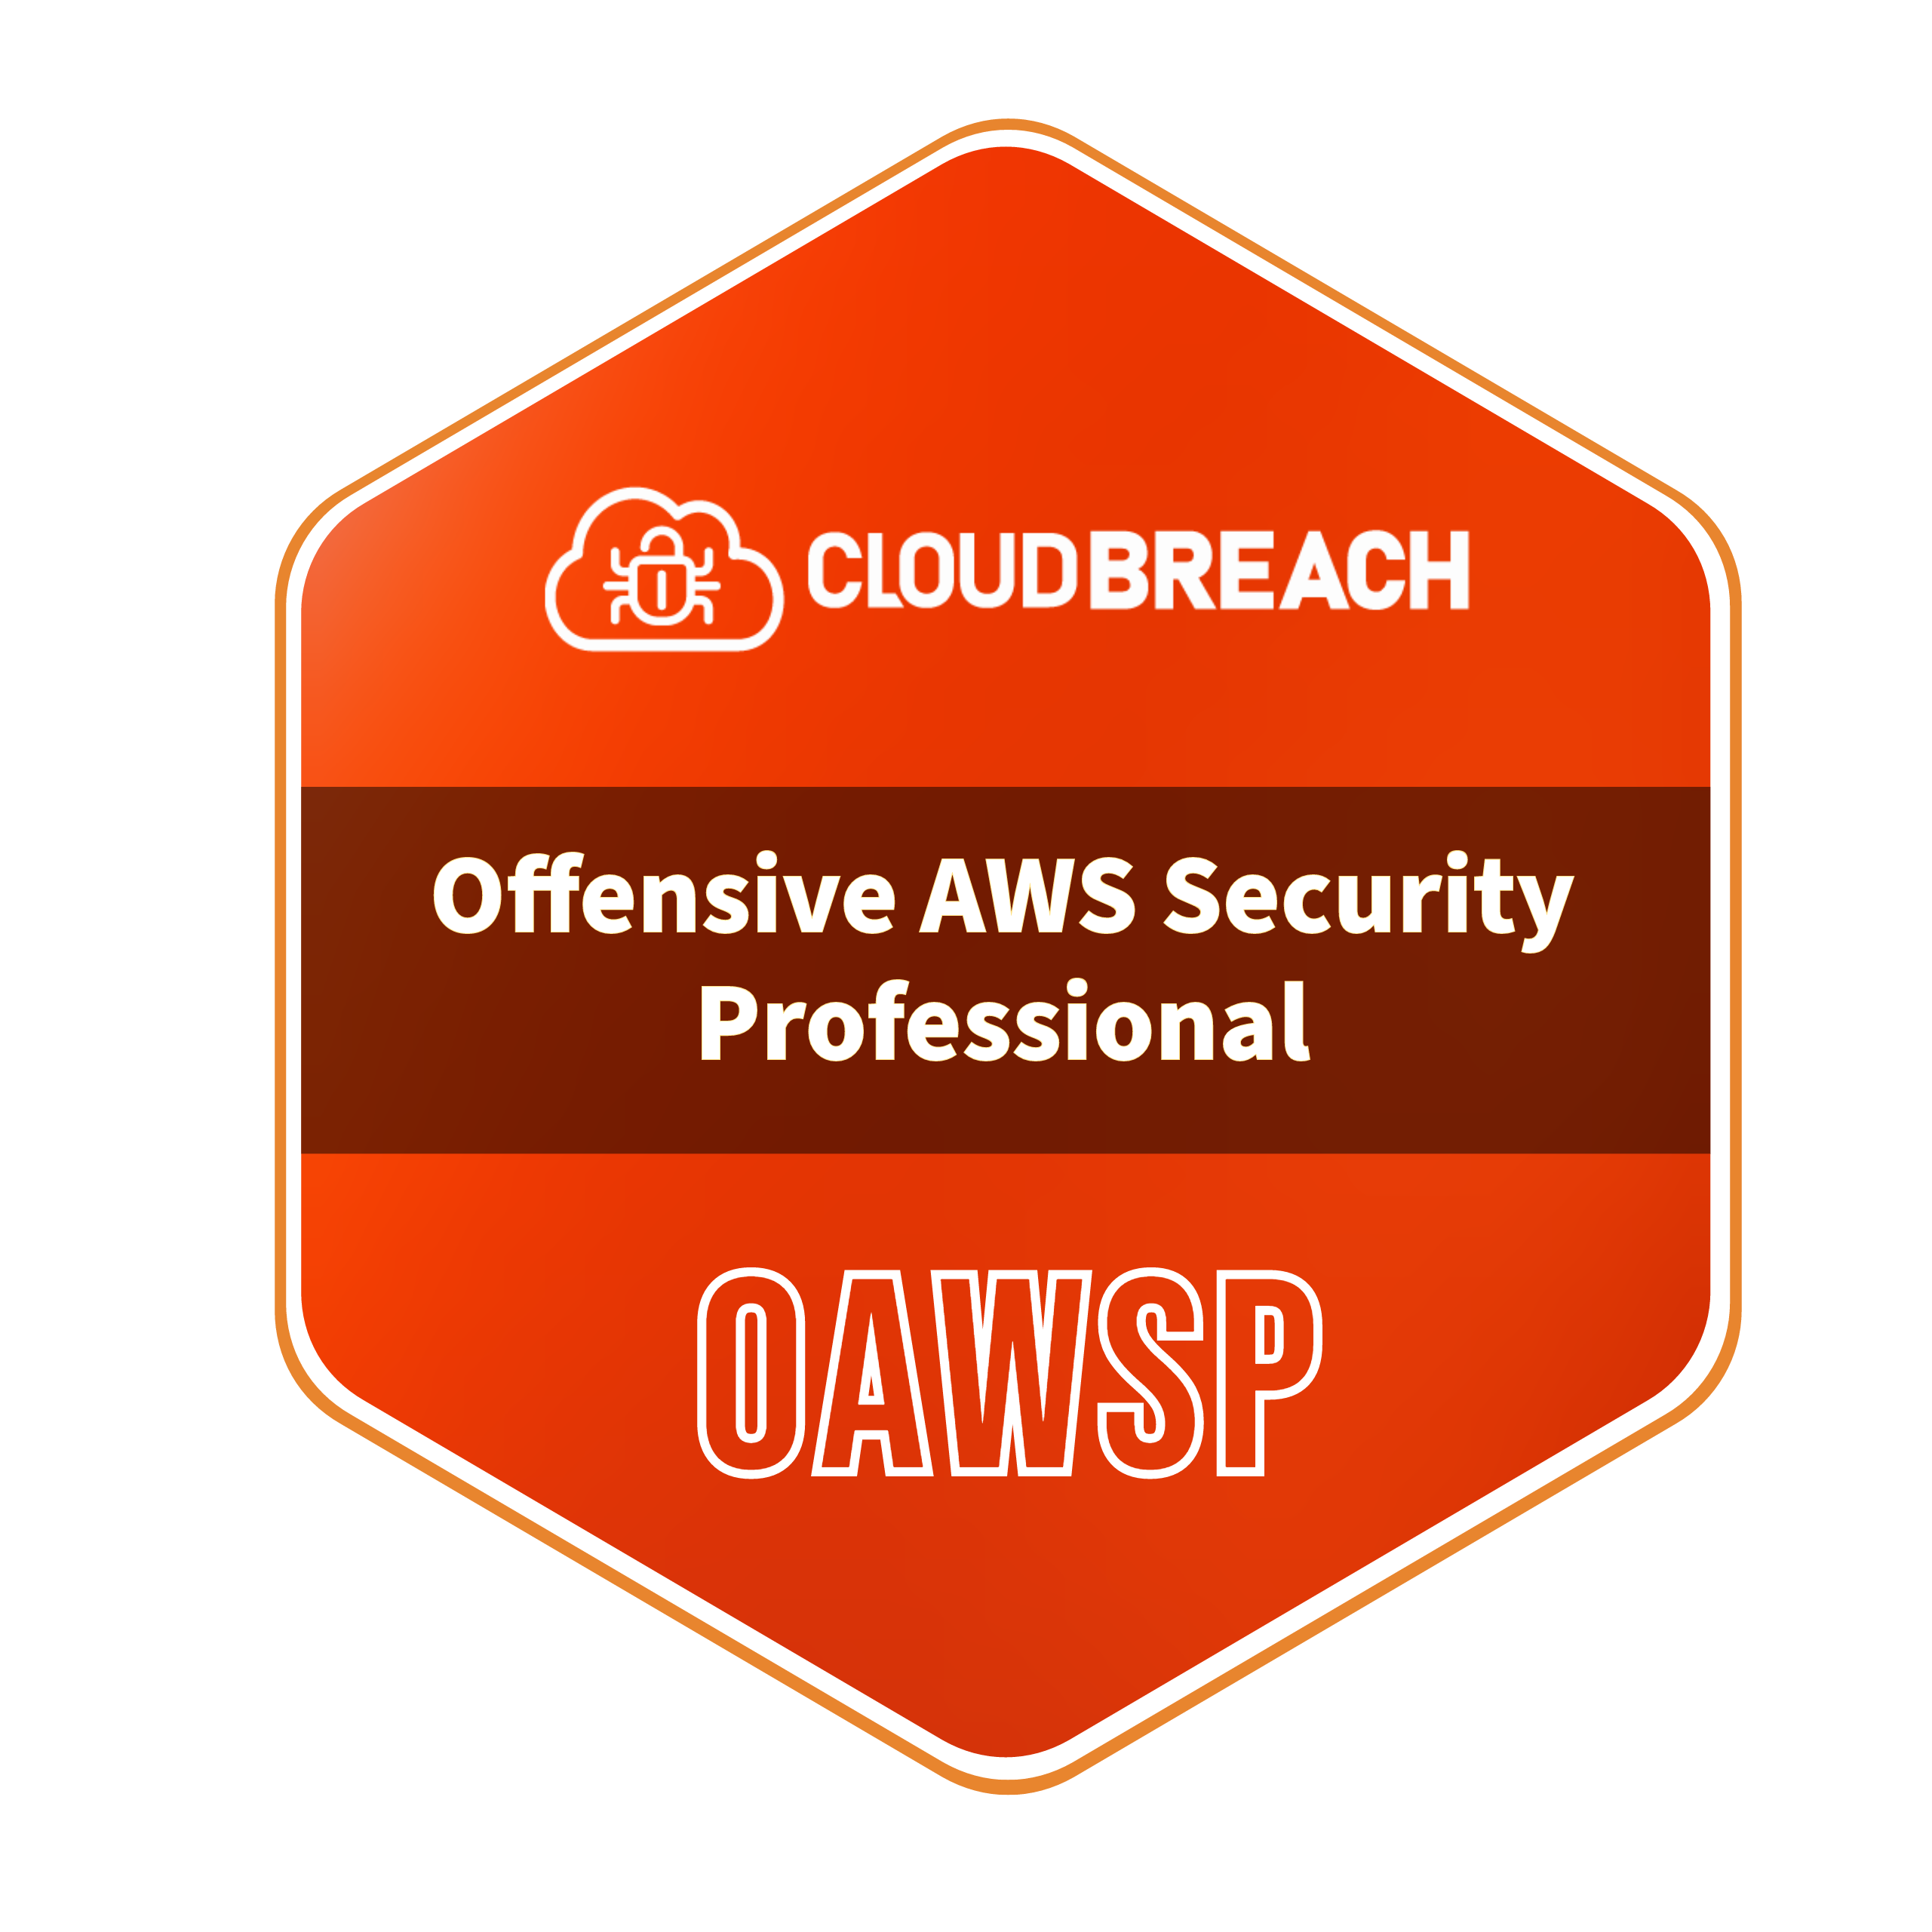 Offensive AWS Security Professional (OAWSP)